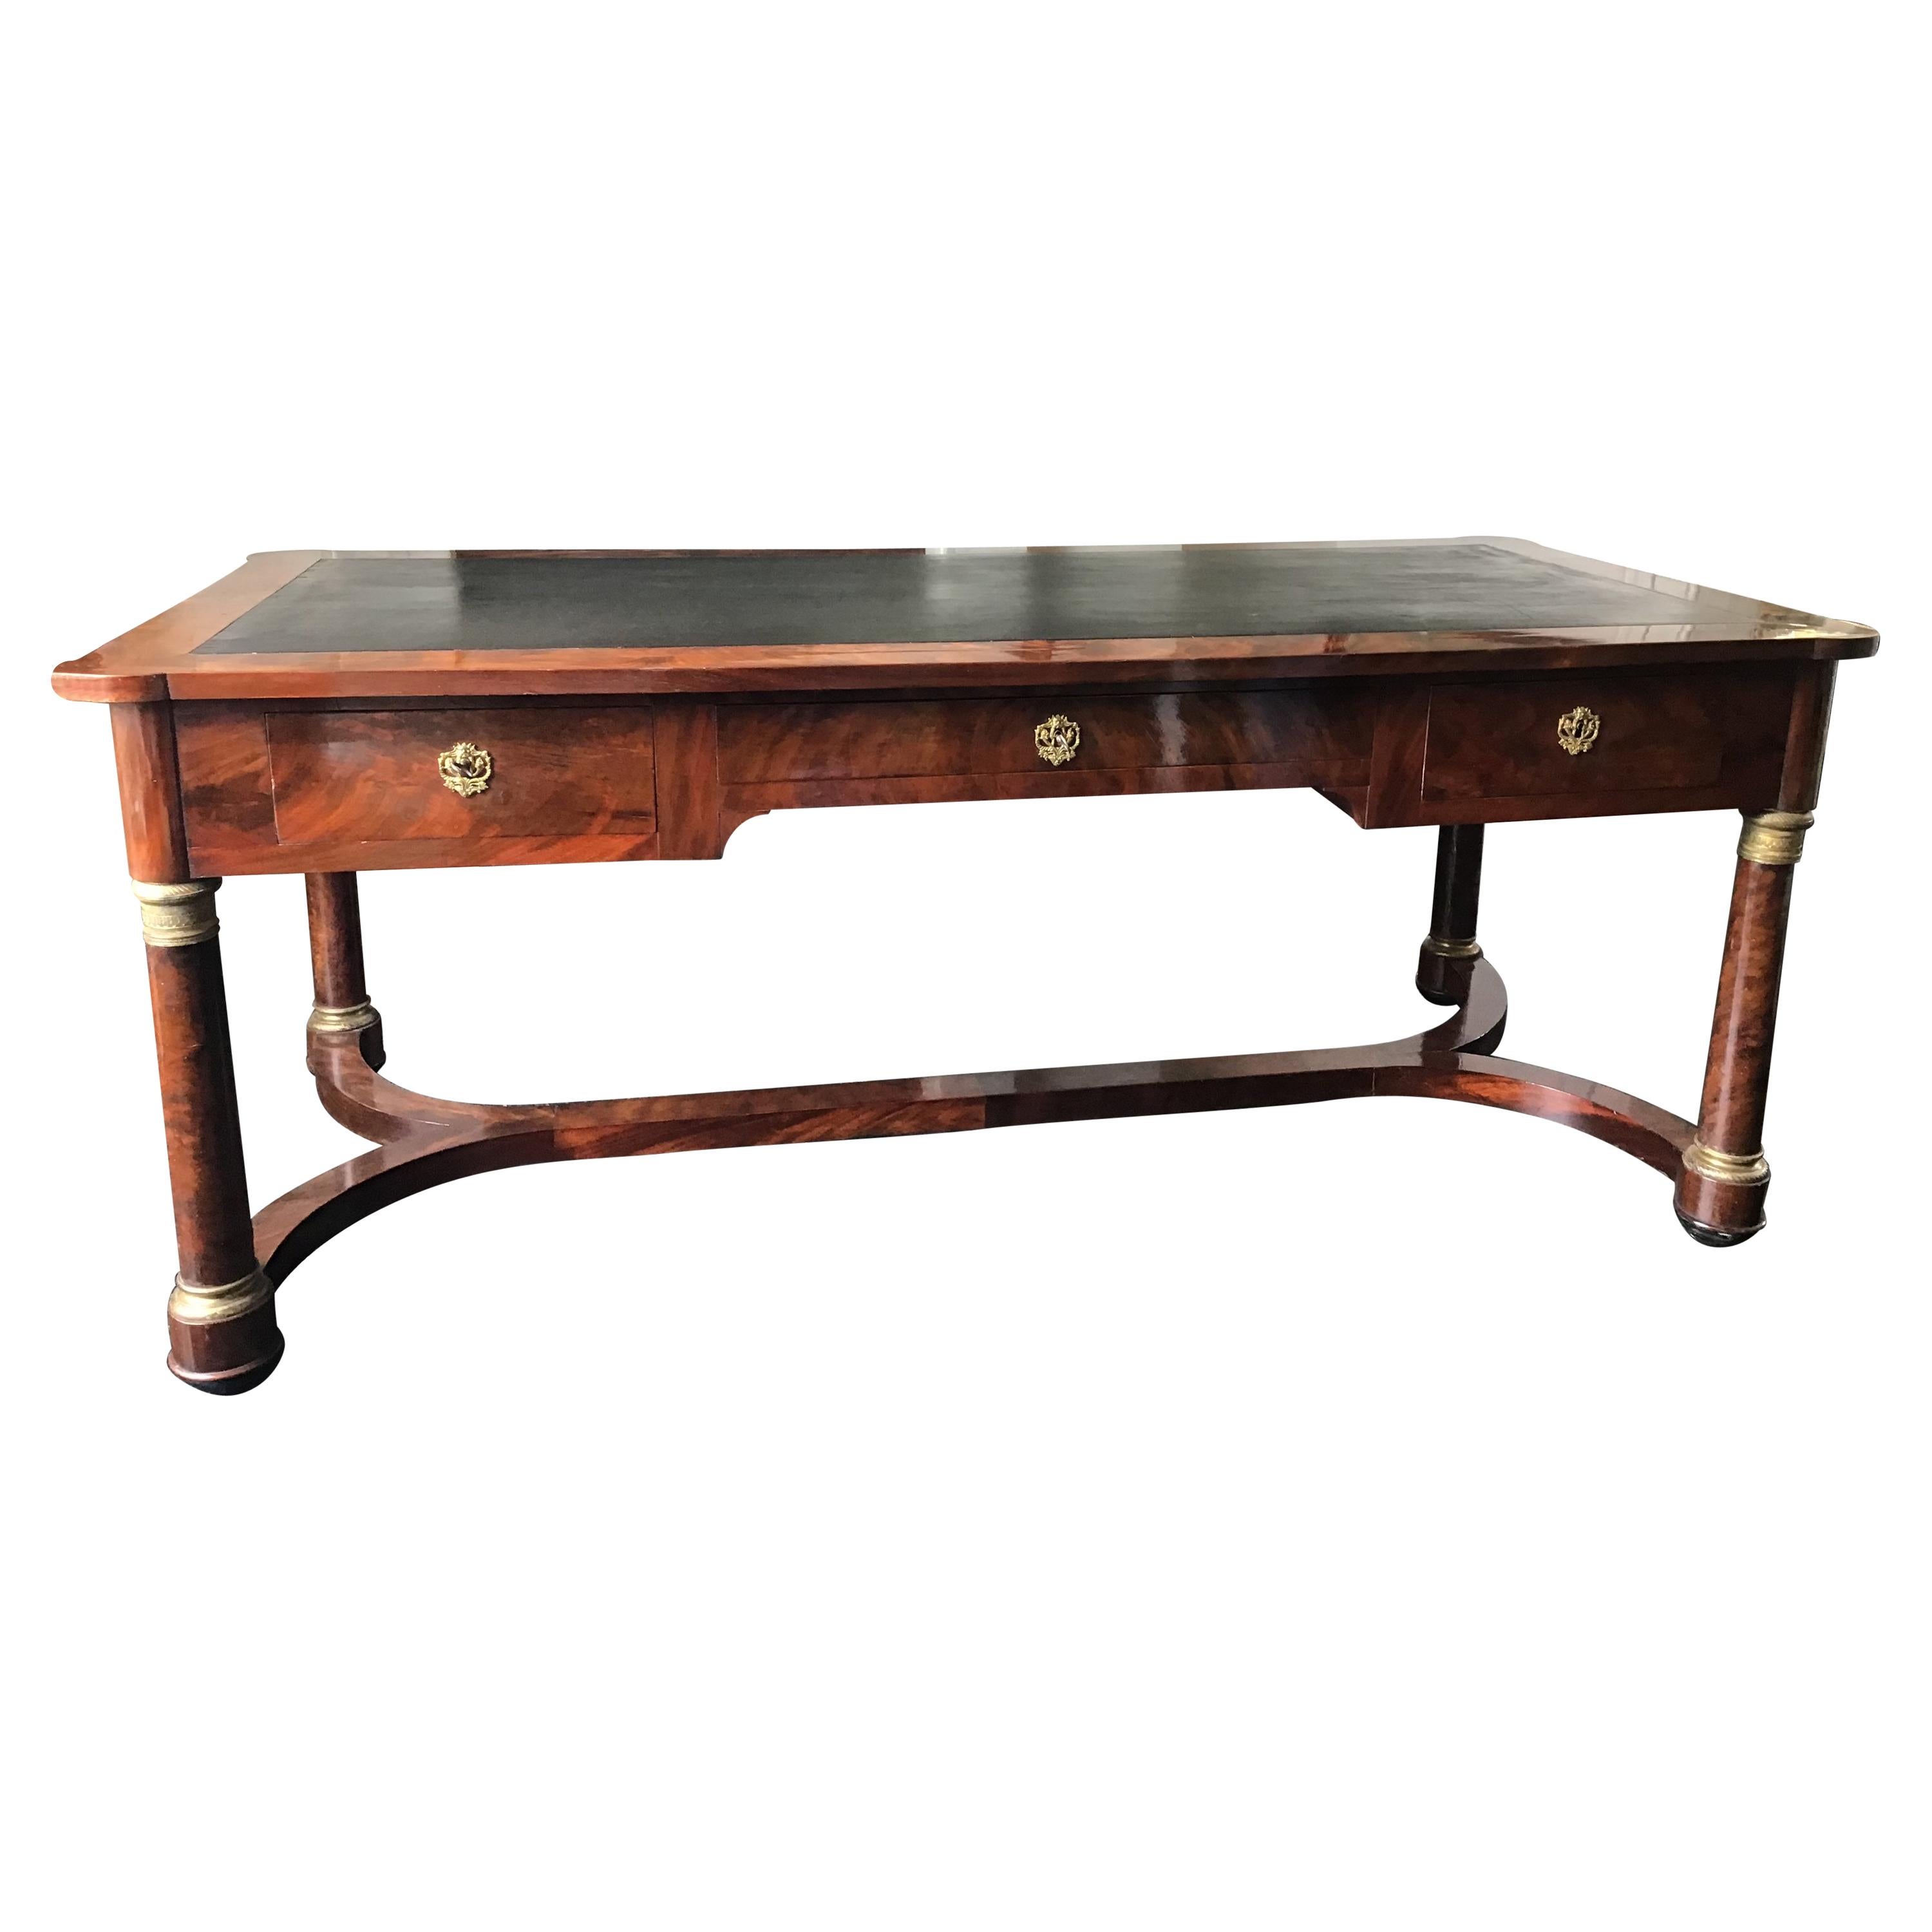 Early 19th French Empire Mahogany and Gilt Mounted Bureau Plat Writing Table